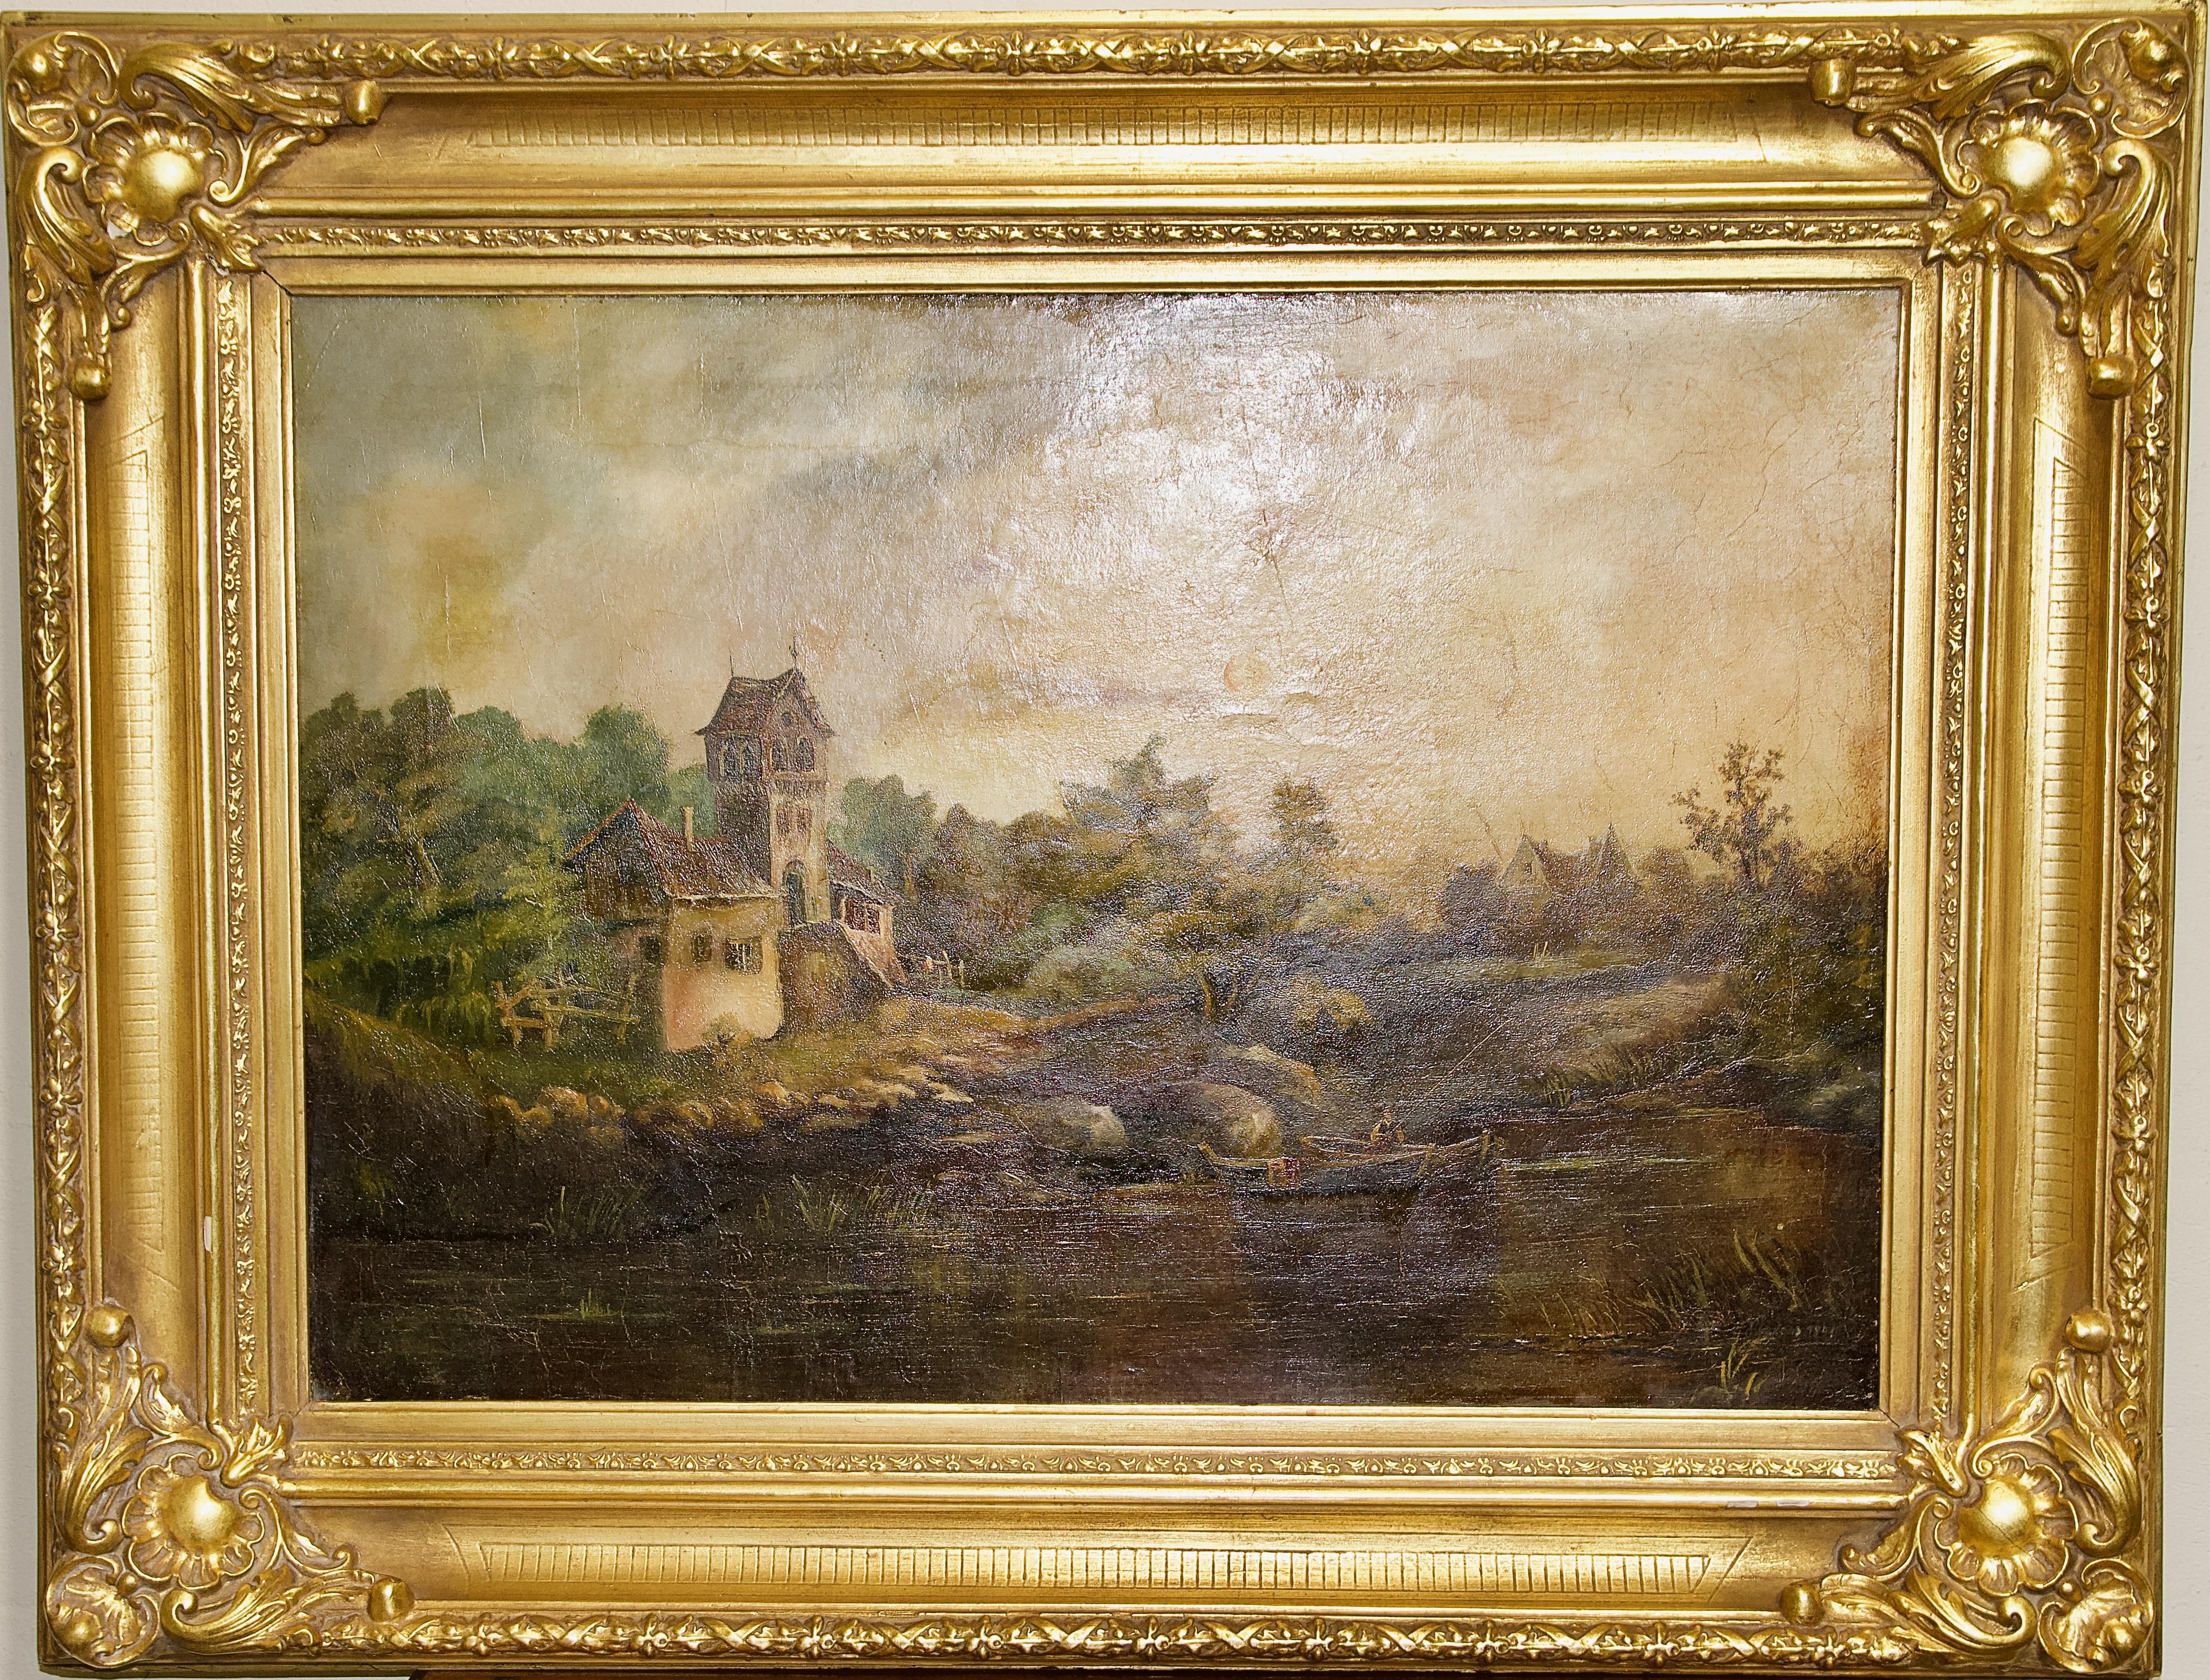 Unknown Landscape Painting - Antique, Romantic Oil Painting, 19th Century. Old Hunting Lodge at the Lake.